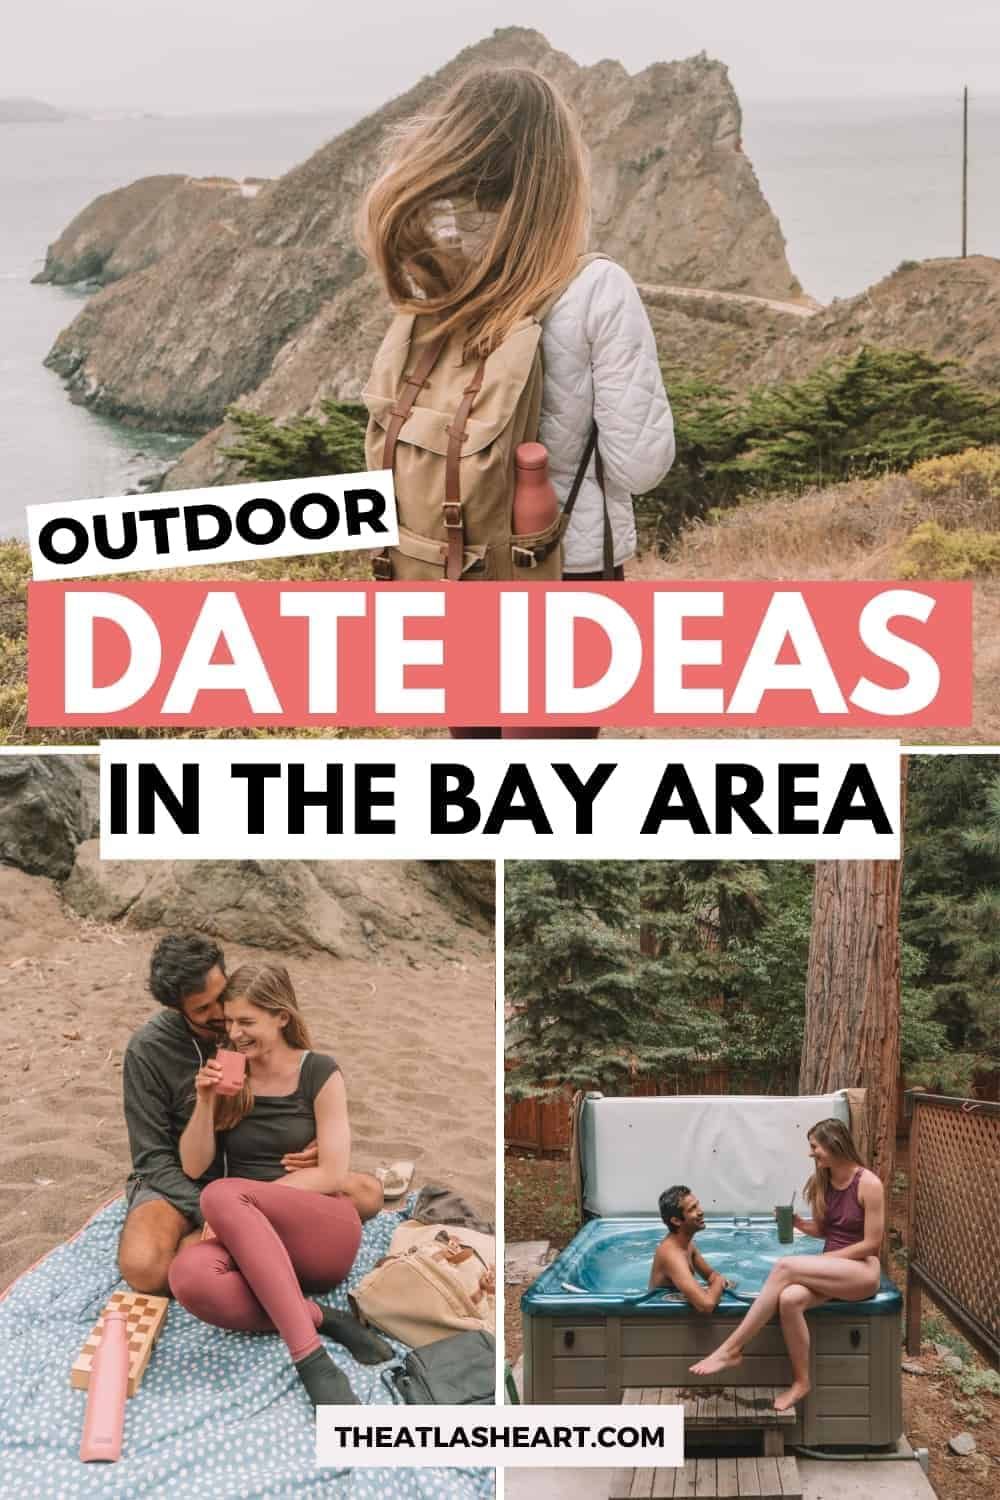 3 Outdoor Date Ideas in the Bay Area (To Enjoy During Quarantine)